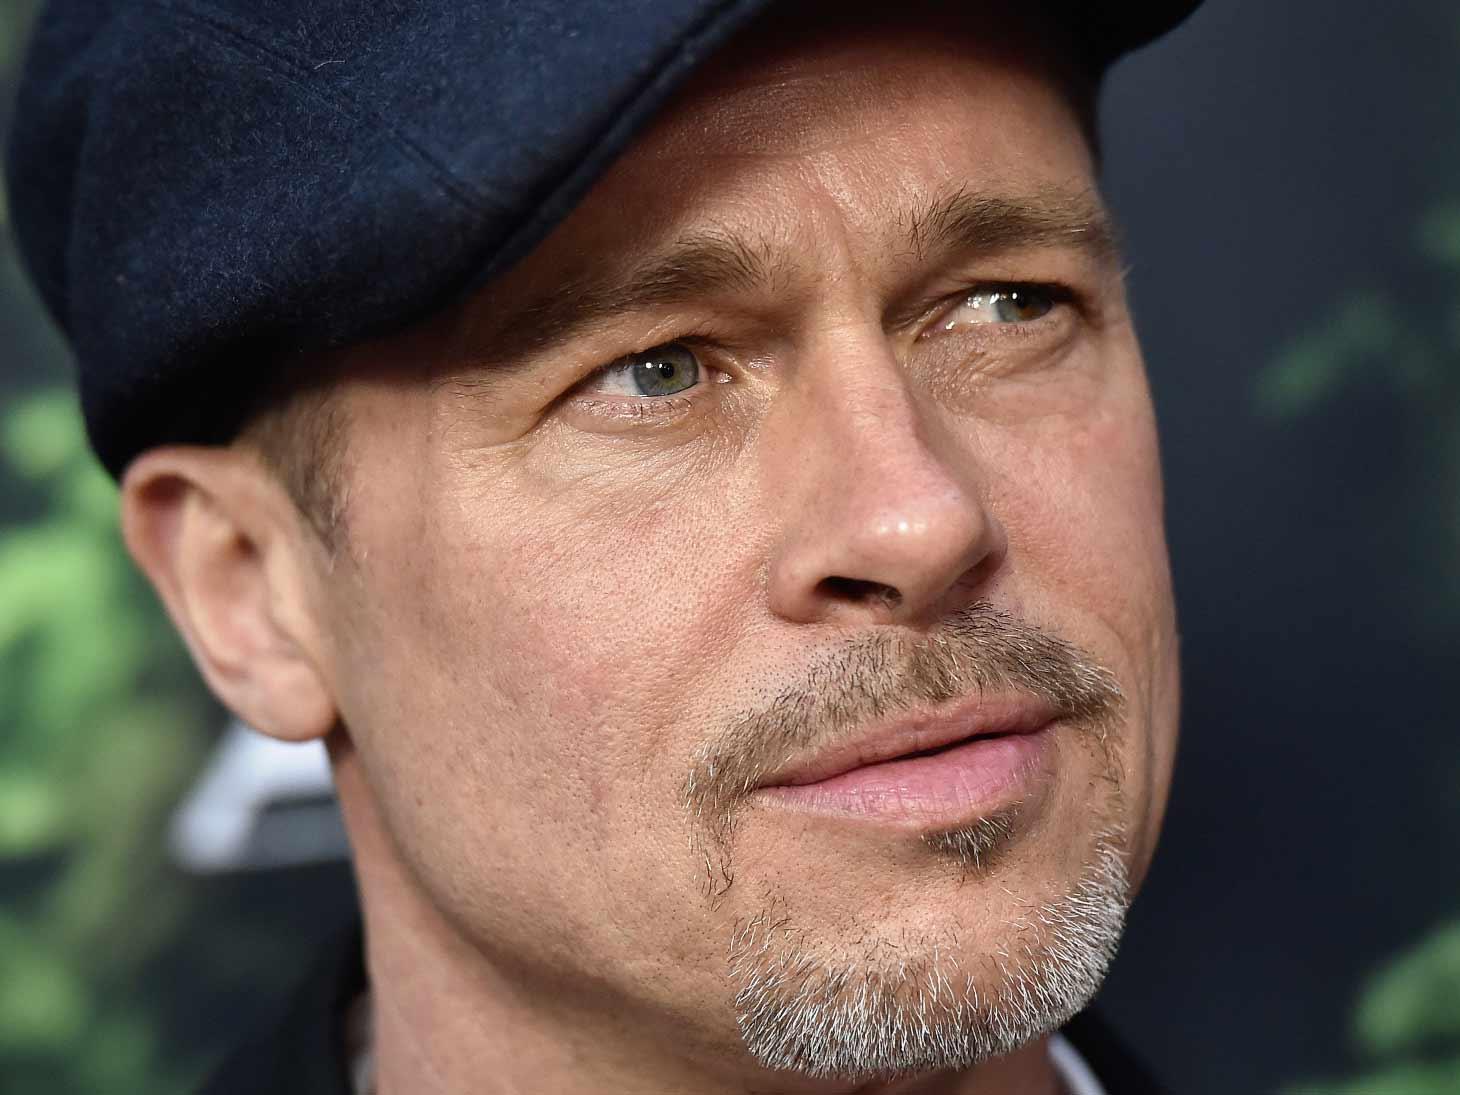 Brad Pitt Fires Back at Hurricane Katrina Victims’ Claim He Only Helped for Good Press, Demands to Be Let Out of Legal Battle